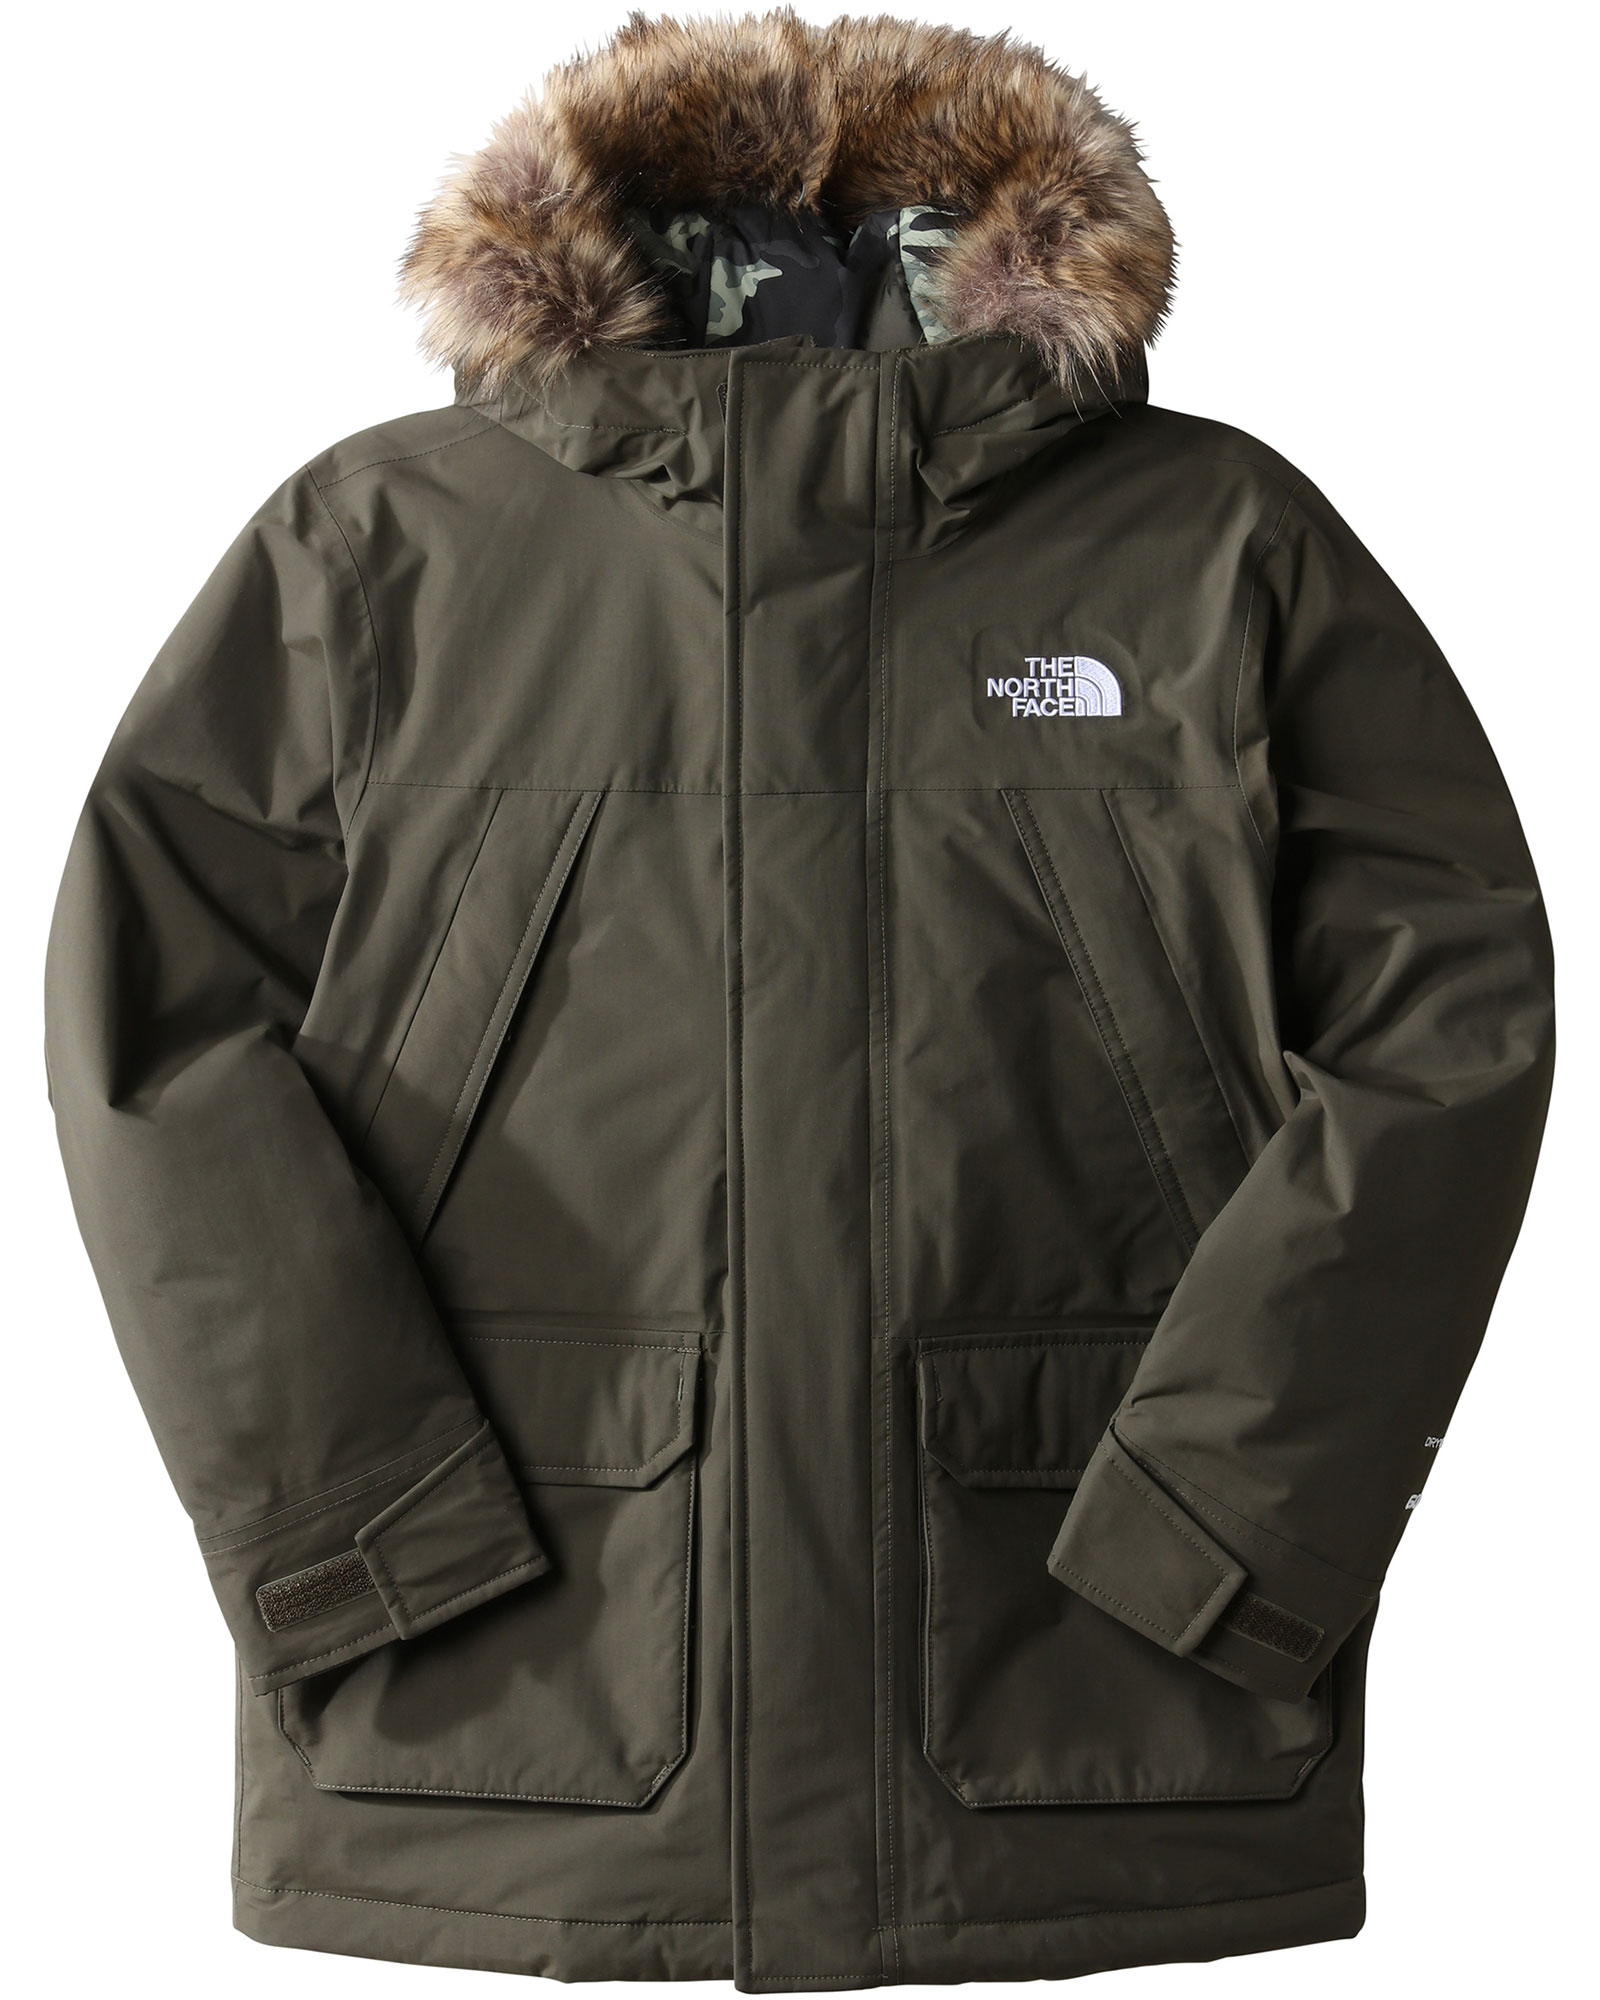 The North Face McMurdo Kids’ Parka Jacket XL - New Taupe Green XL